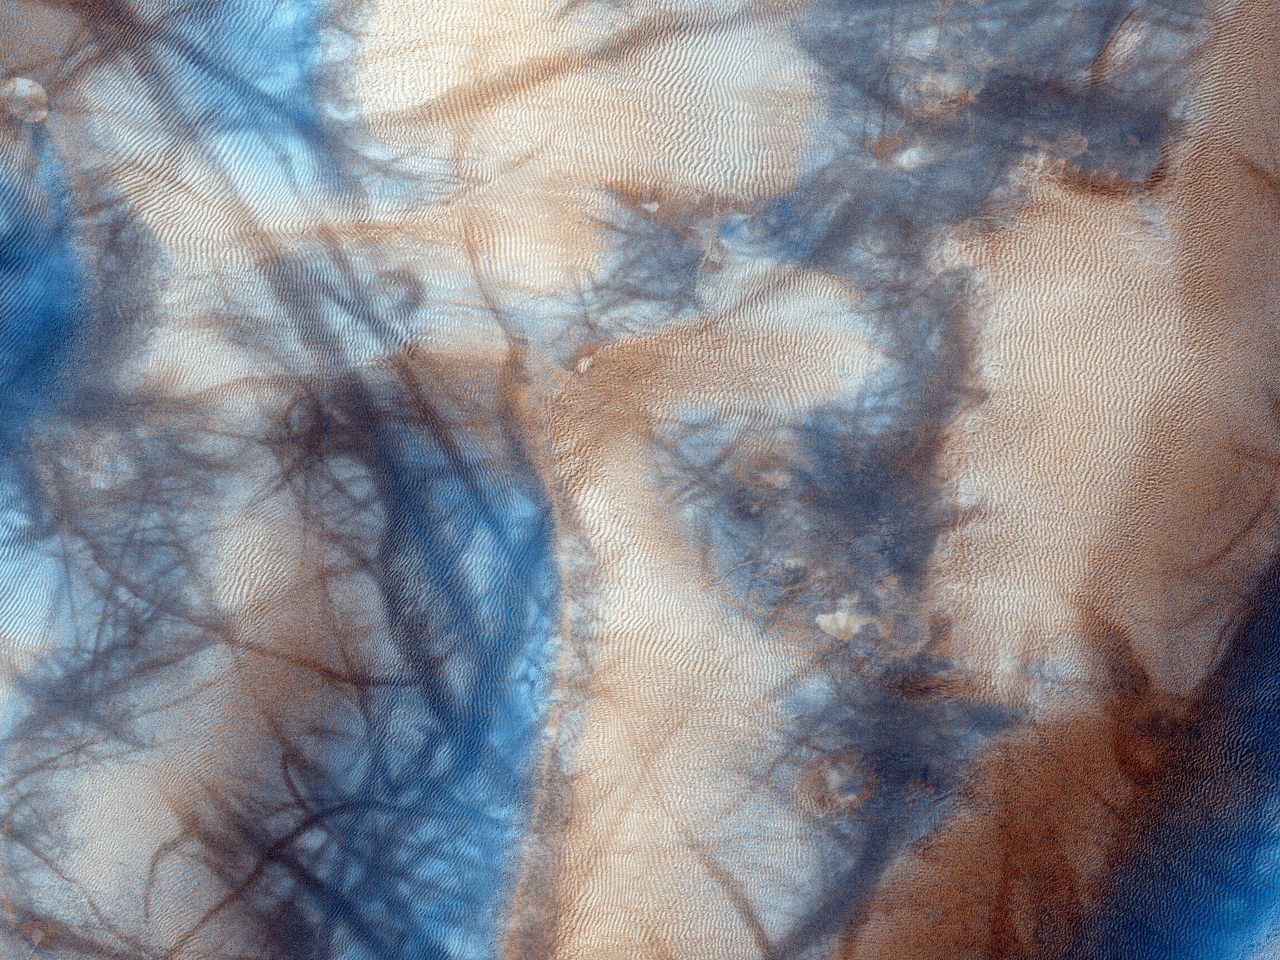 Dark dust devil trails crisscross frigid dunes and gullies in the southern highlands of Mars.